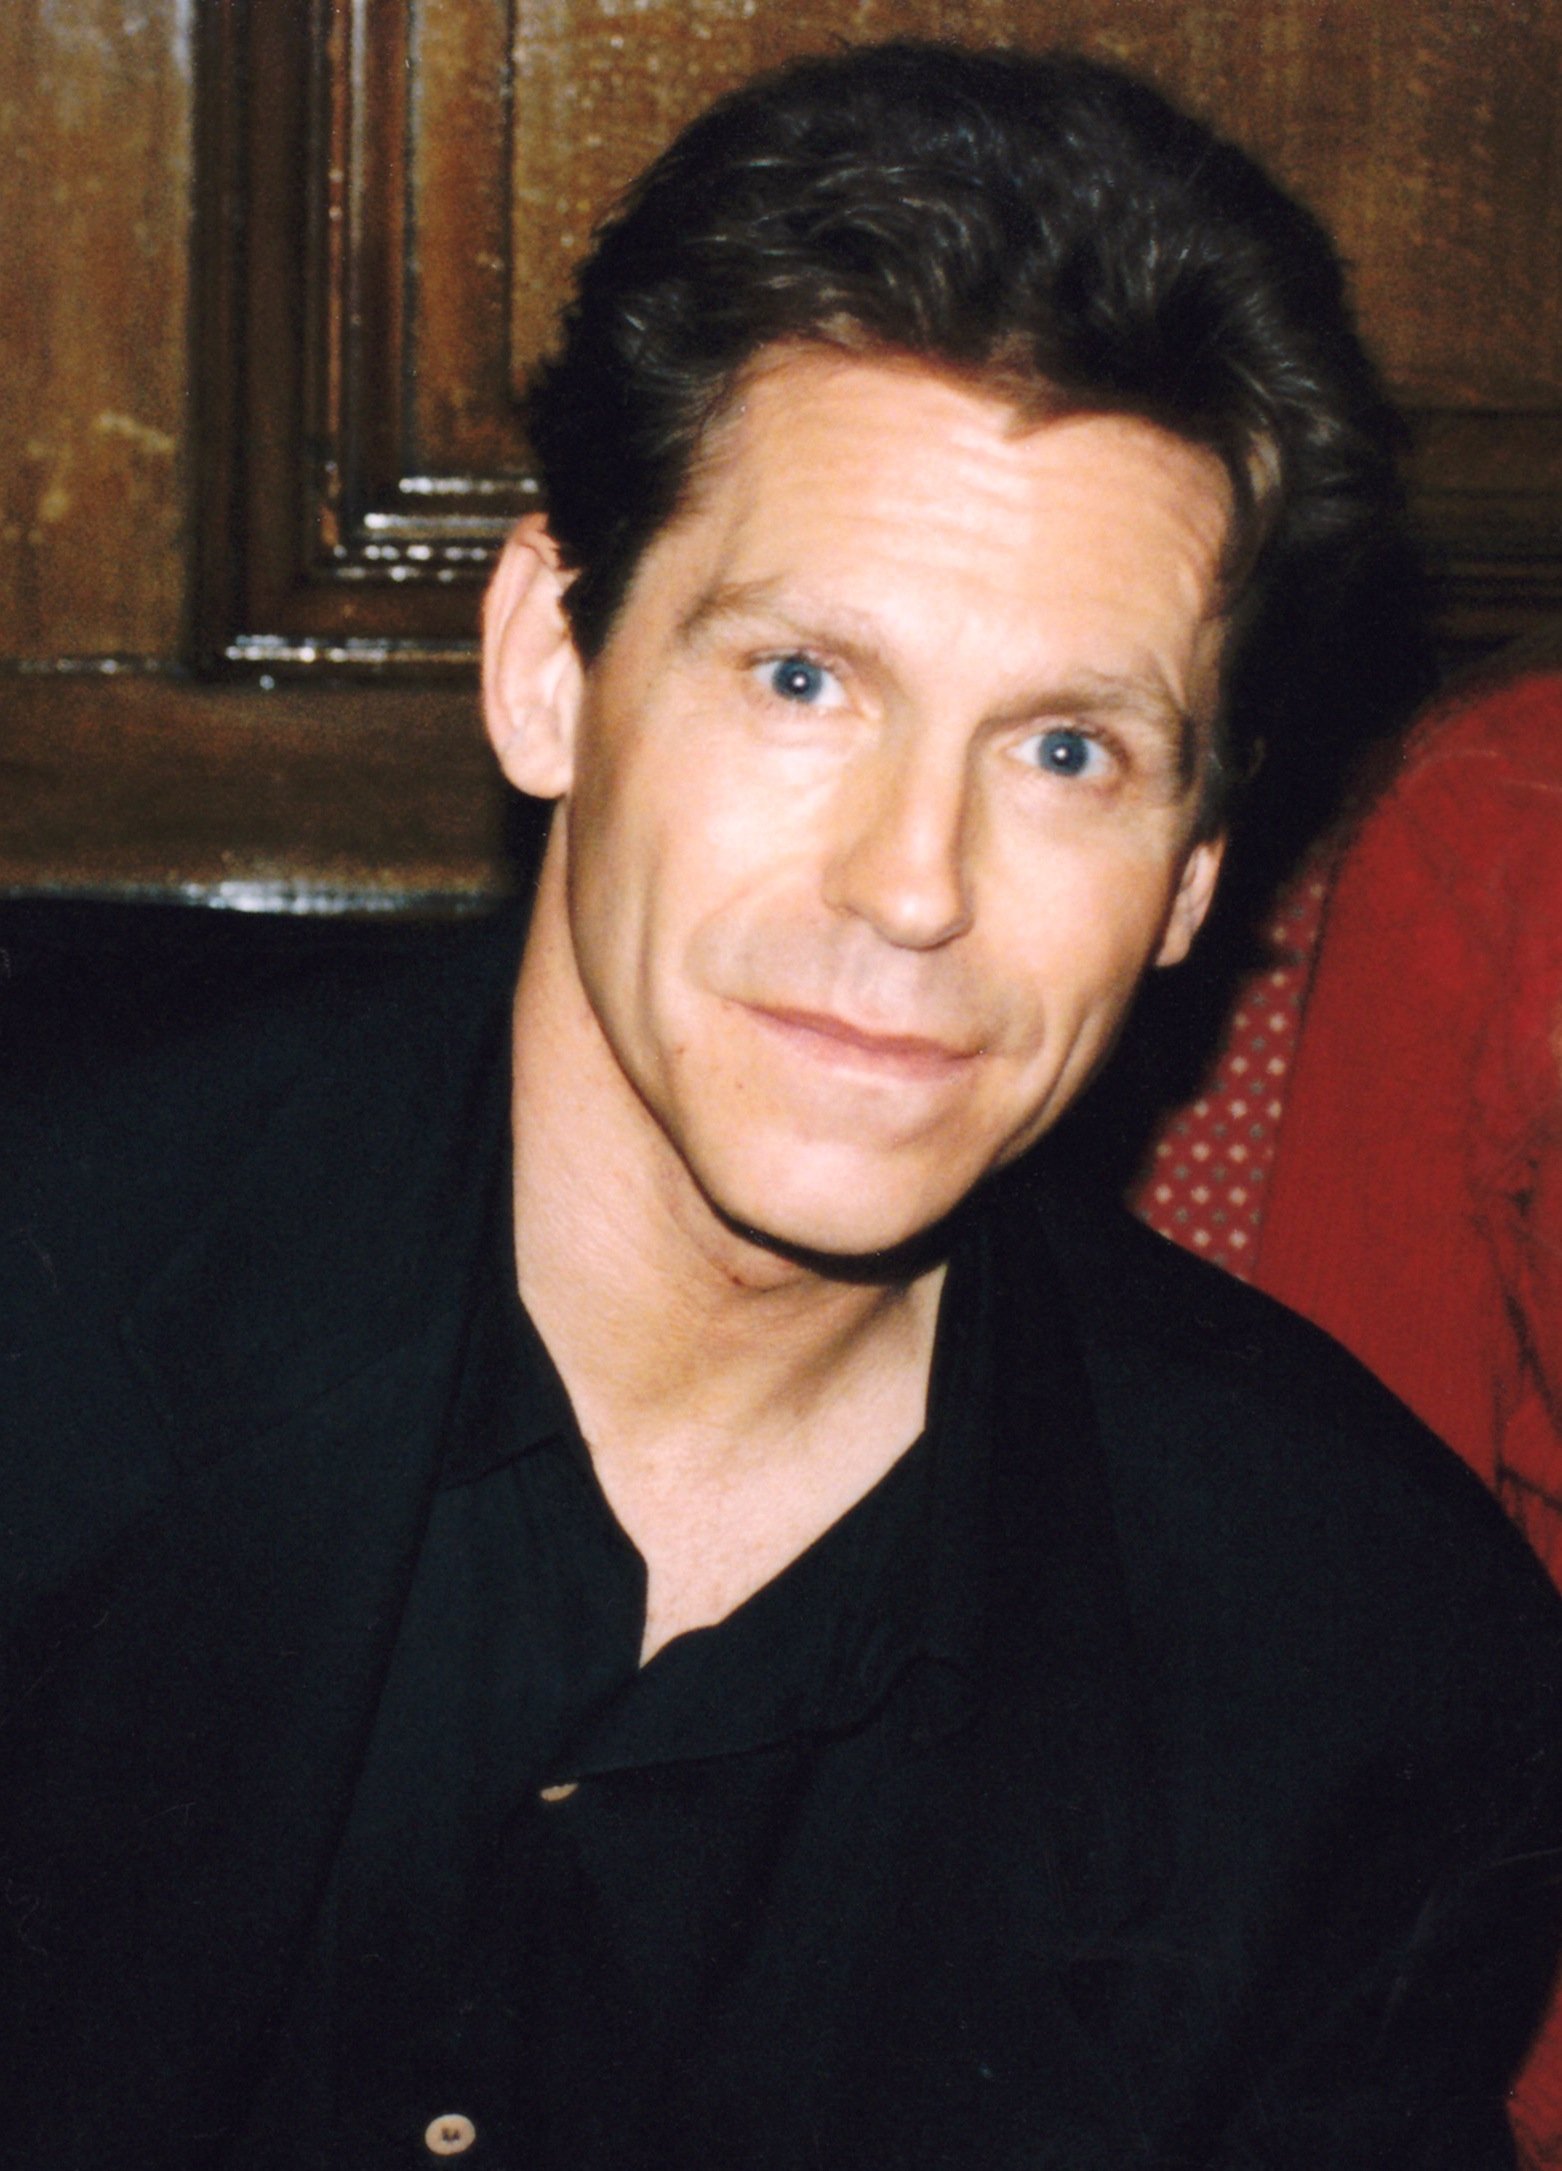 Jeff Conaway bei einer TV-Versammlung 1998 | Quelle: CC BY-SA 2.0, Wikimedia Commons Images